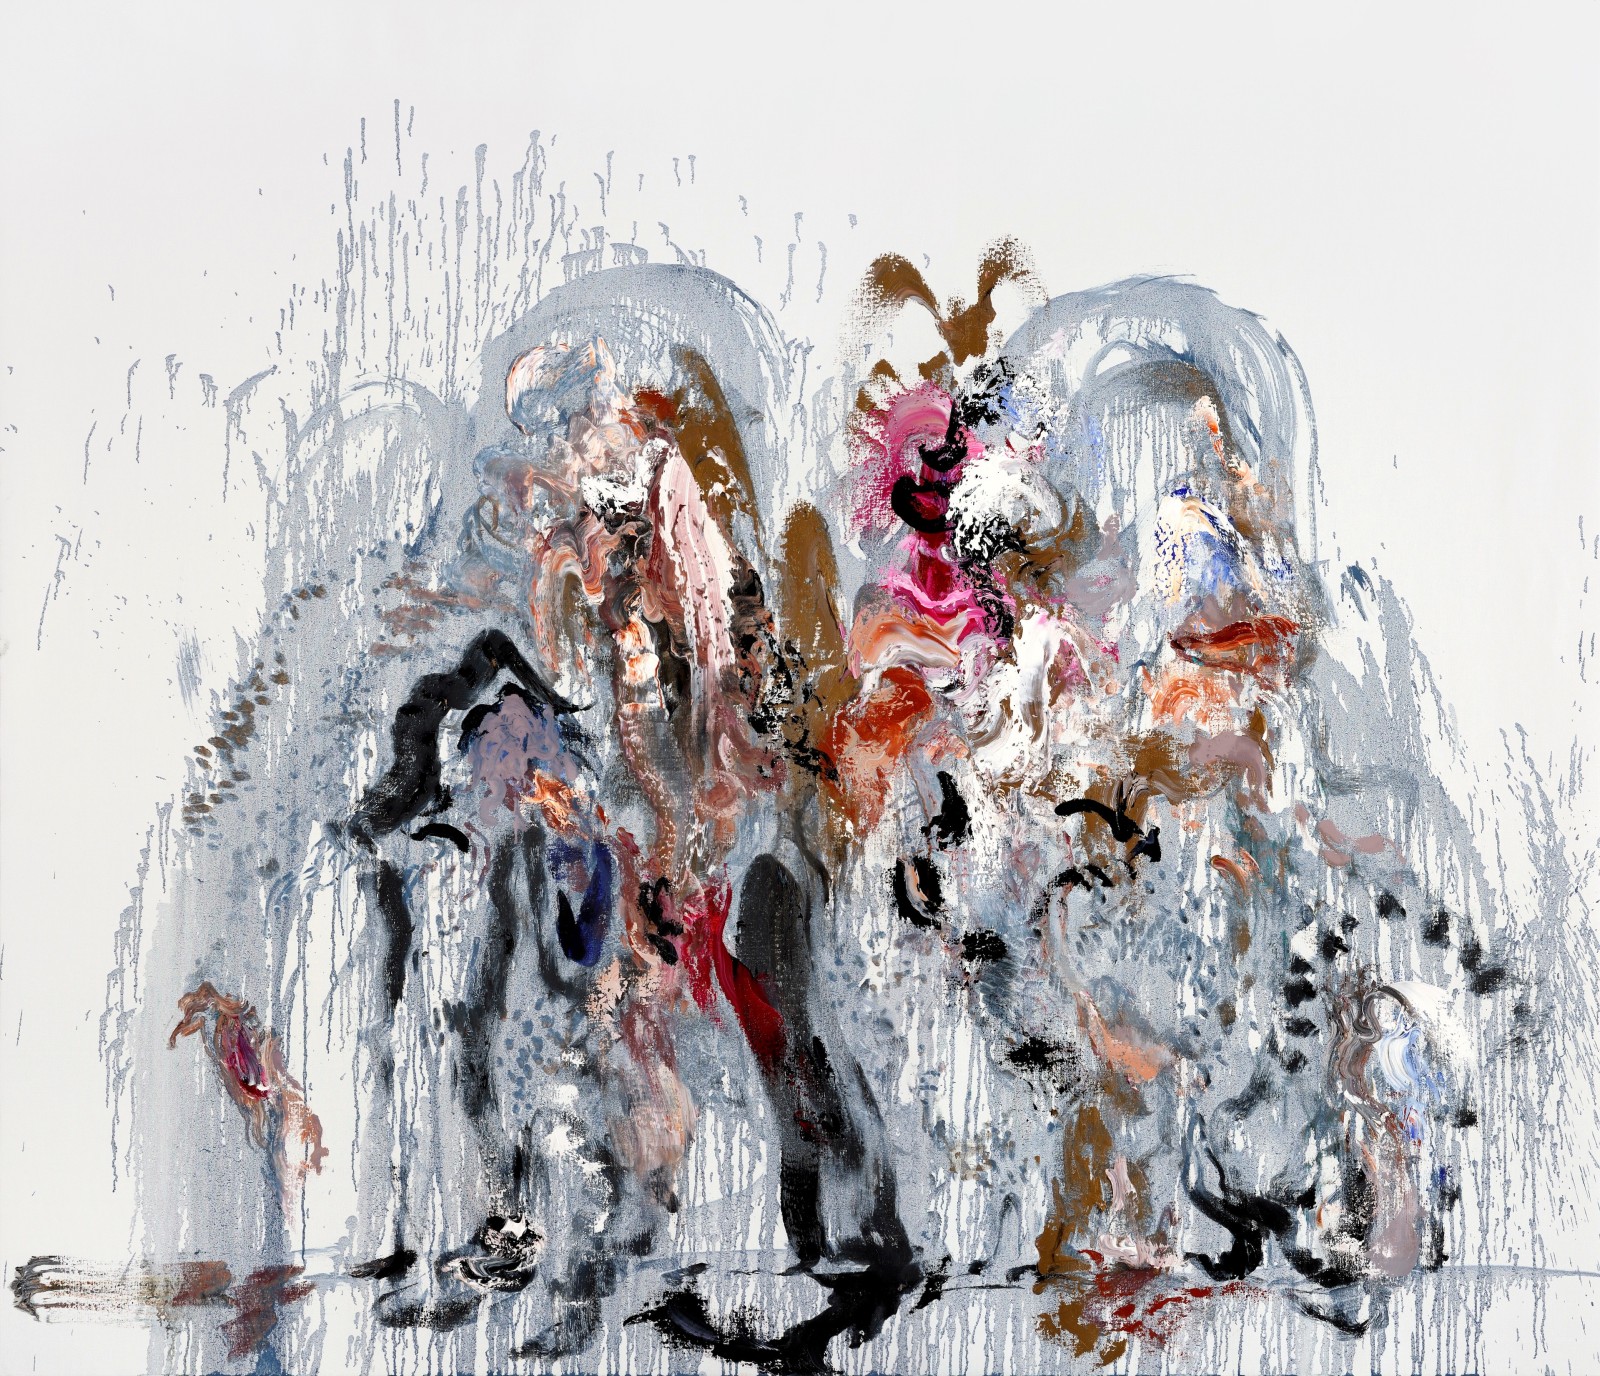 Maggi Hambling: Real time reviewed in Artlyst